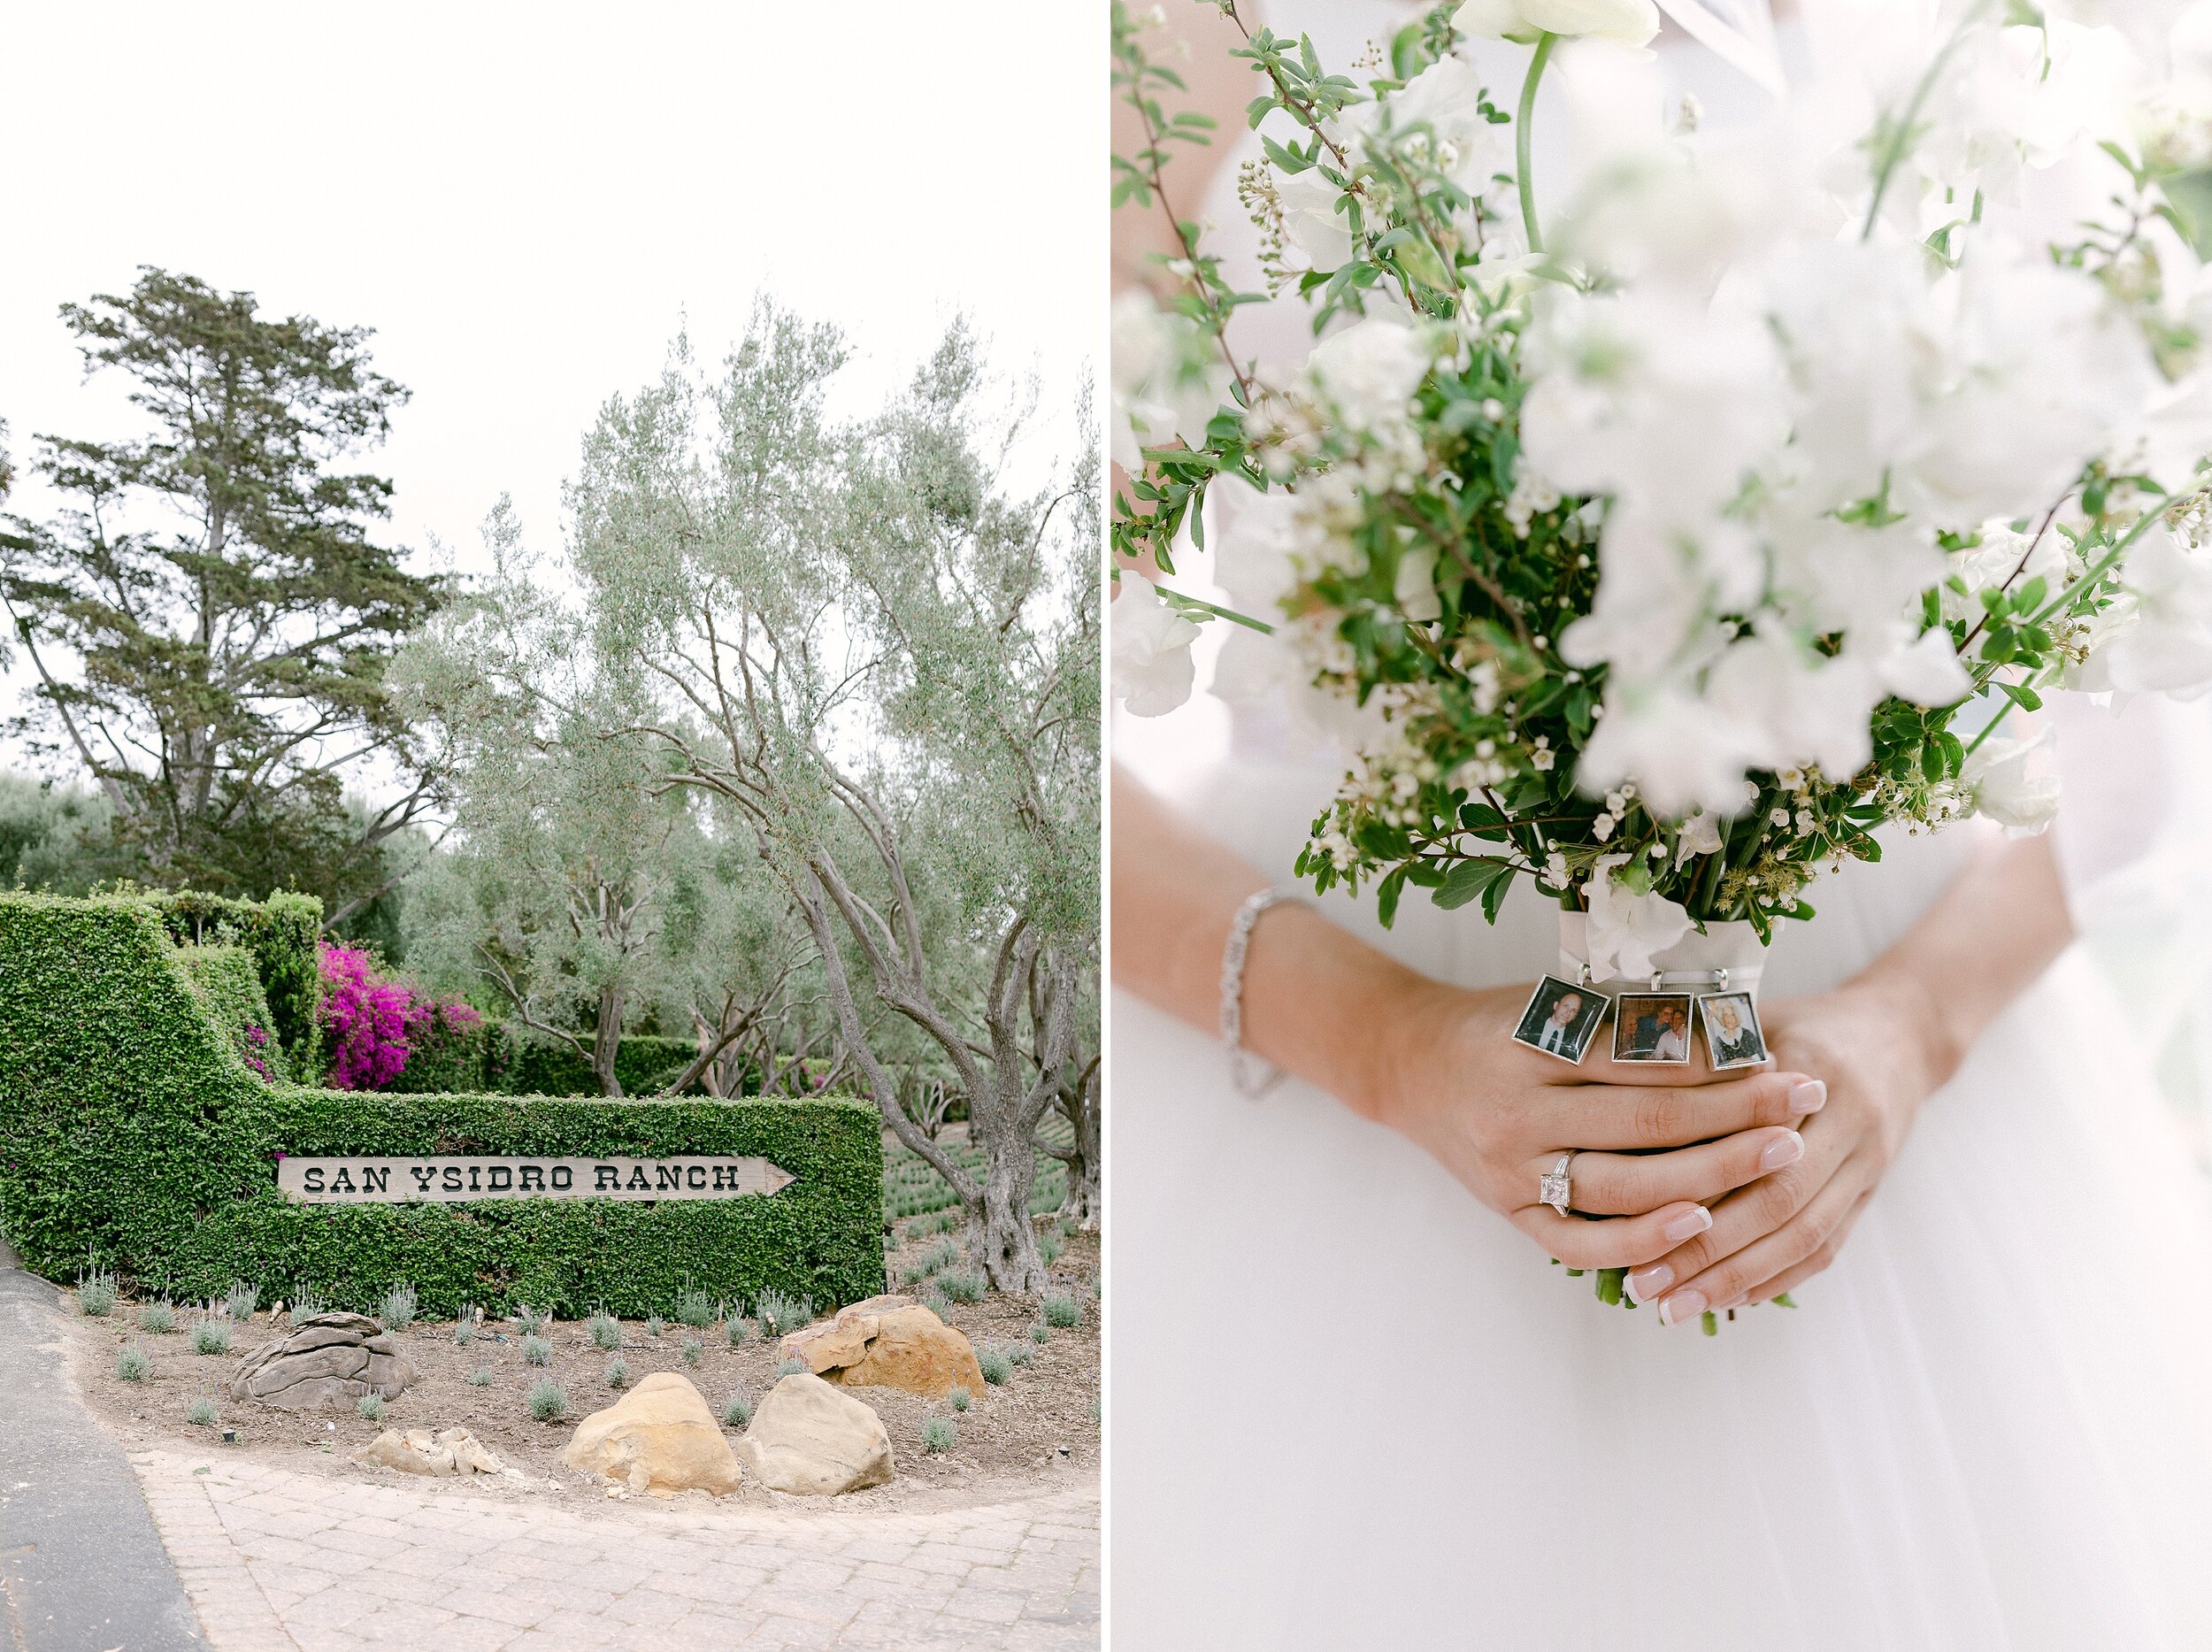 Image on left shows the entry sign to San Ysidro Ranch.  Image on right shows bride holding bouquet of white sweet peas hand tied with a white ribbon showcasing photo charms of deceased loved ones.